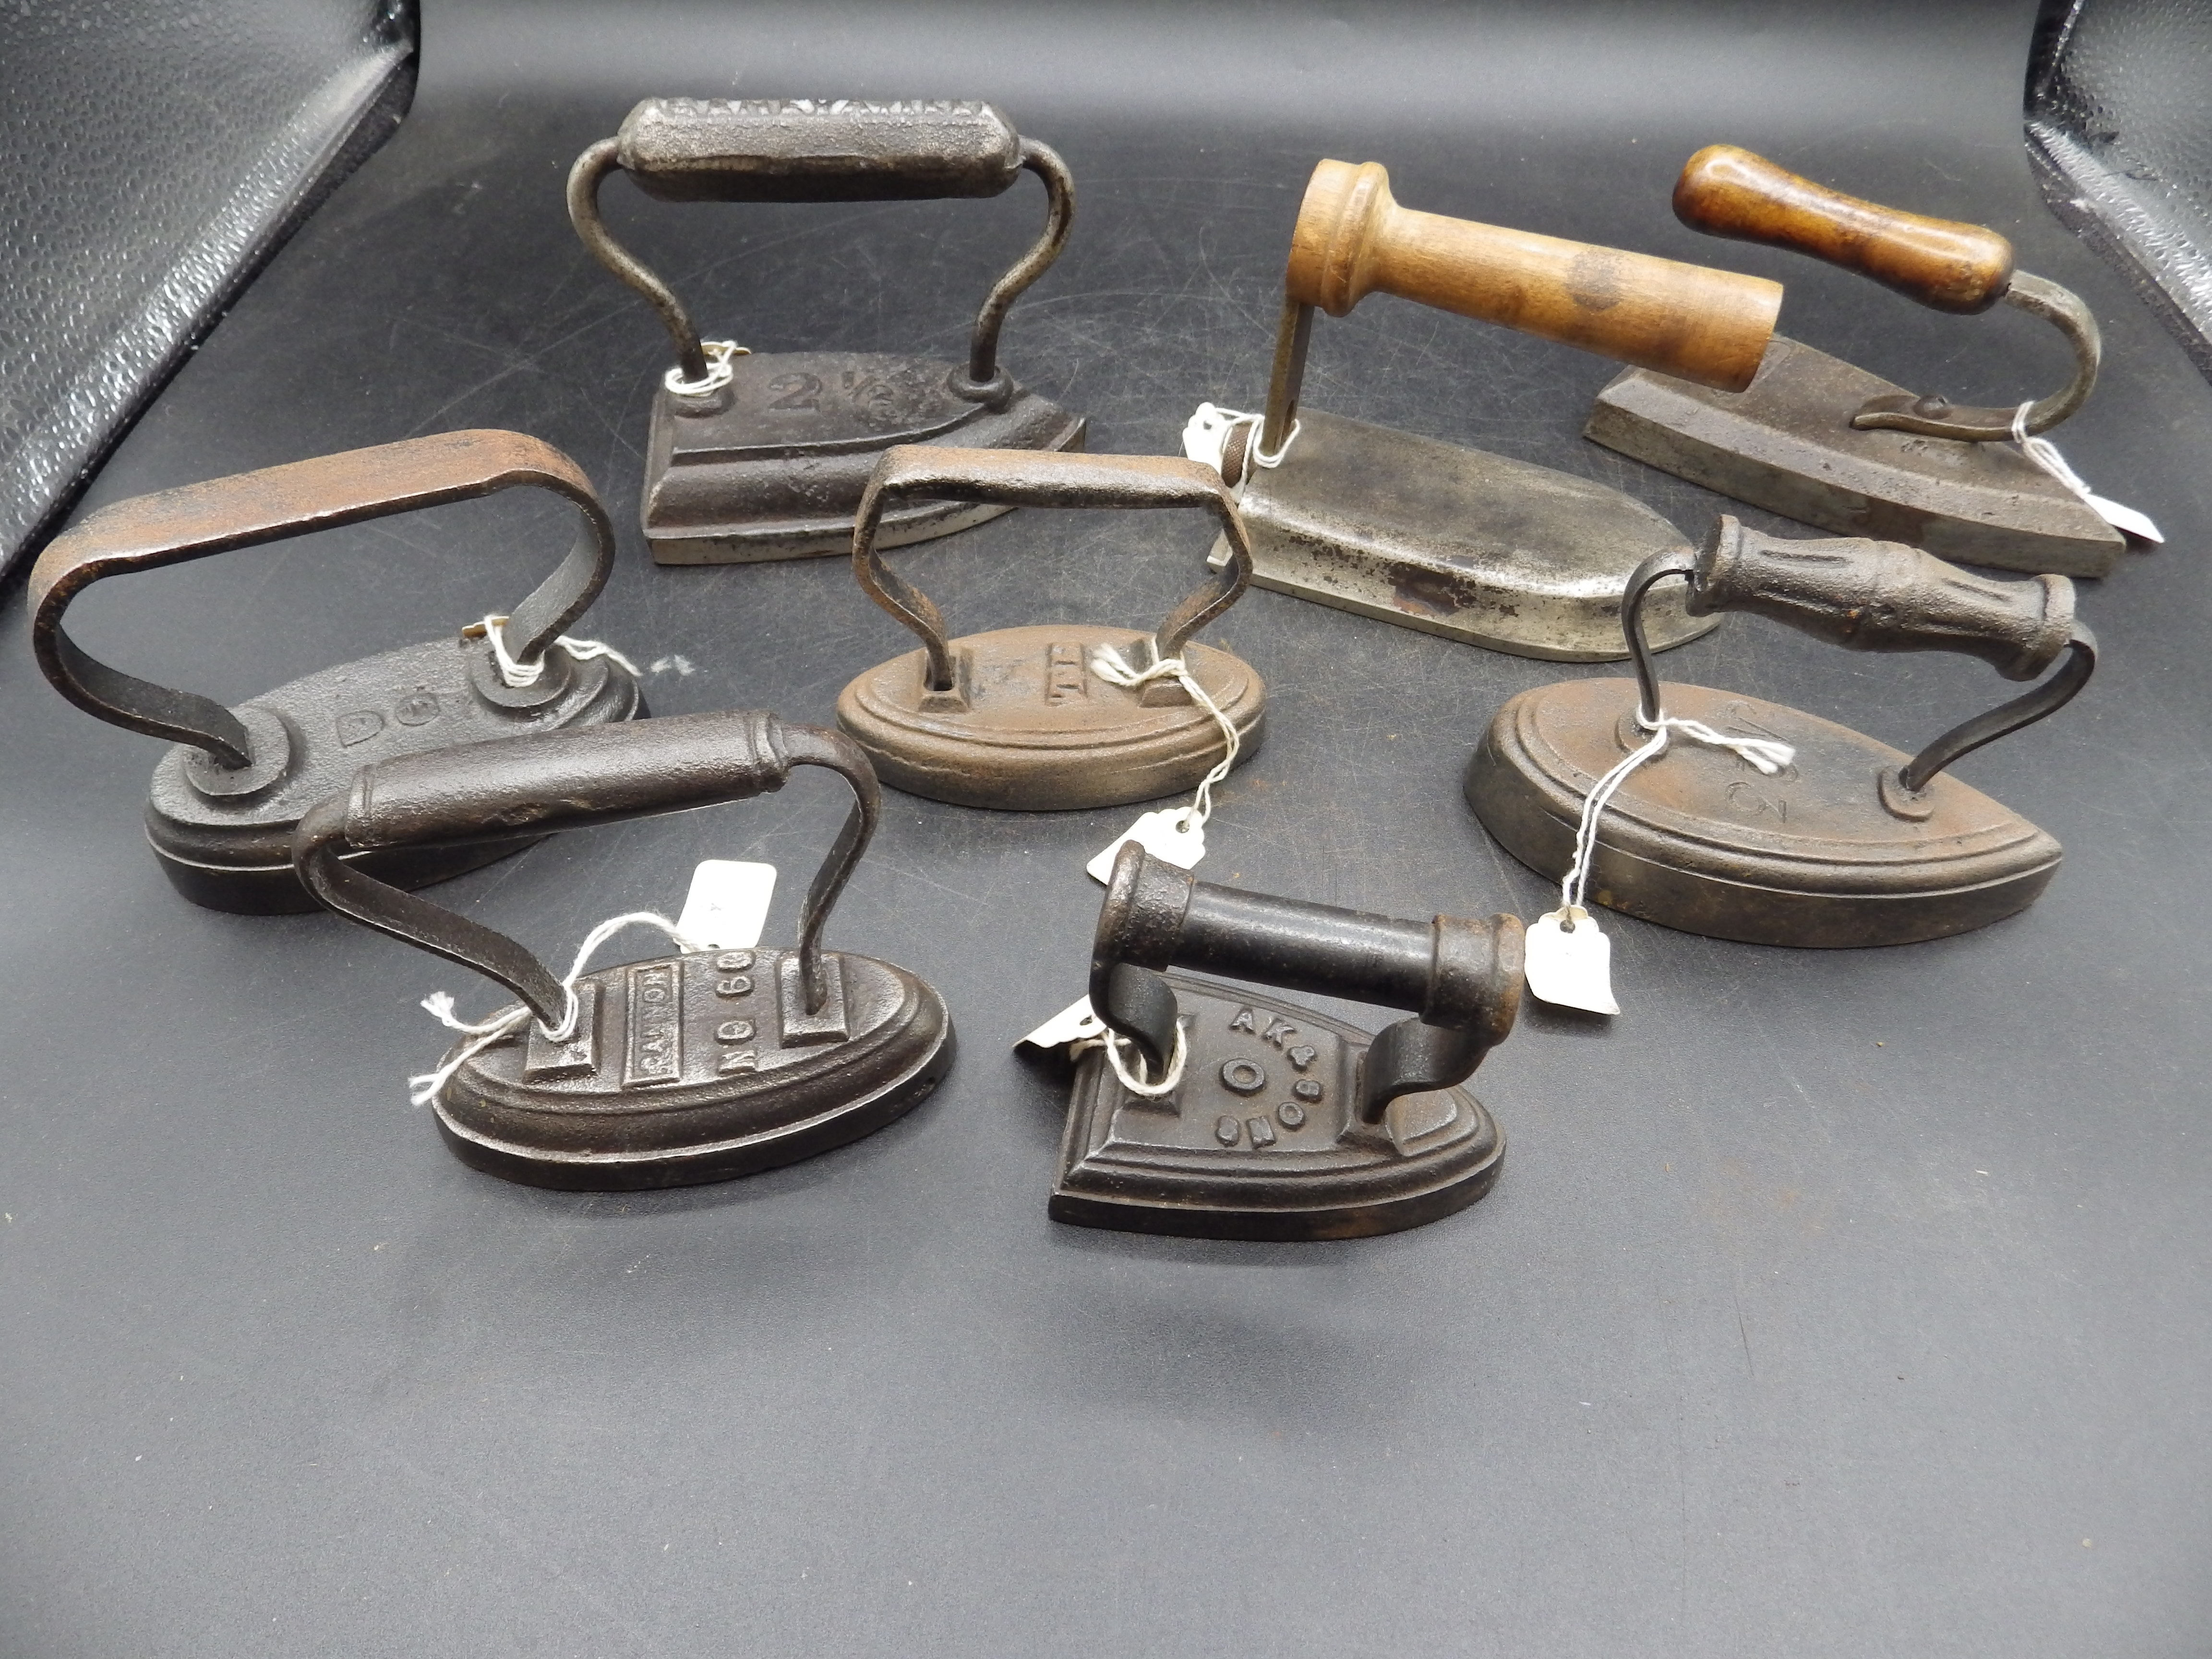 8 assorted minature irons to include hatters irons includes Geneva, TH, GC, Cannon, AK & Sons etc - Image 2 of 2